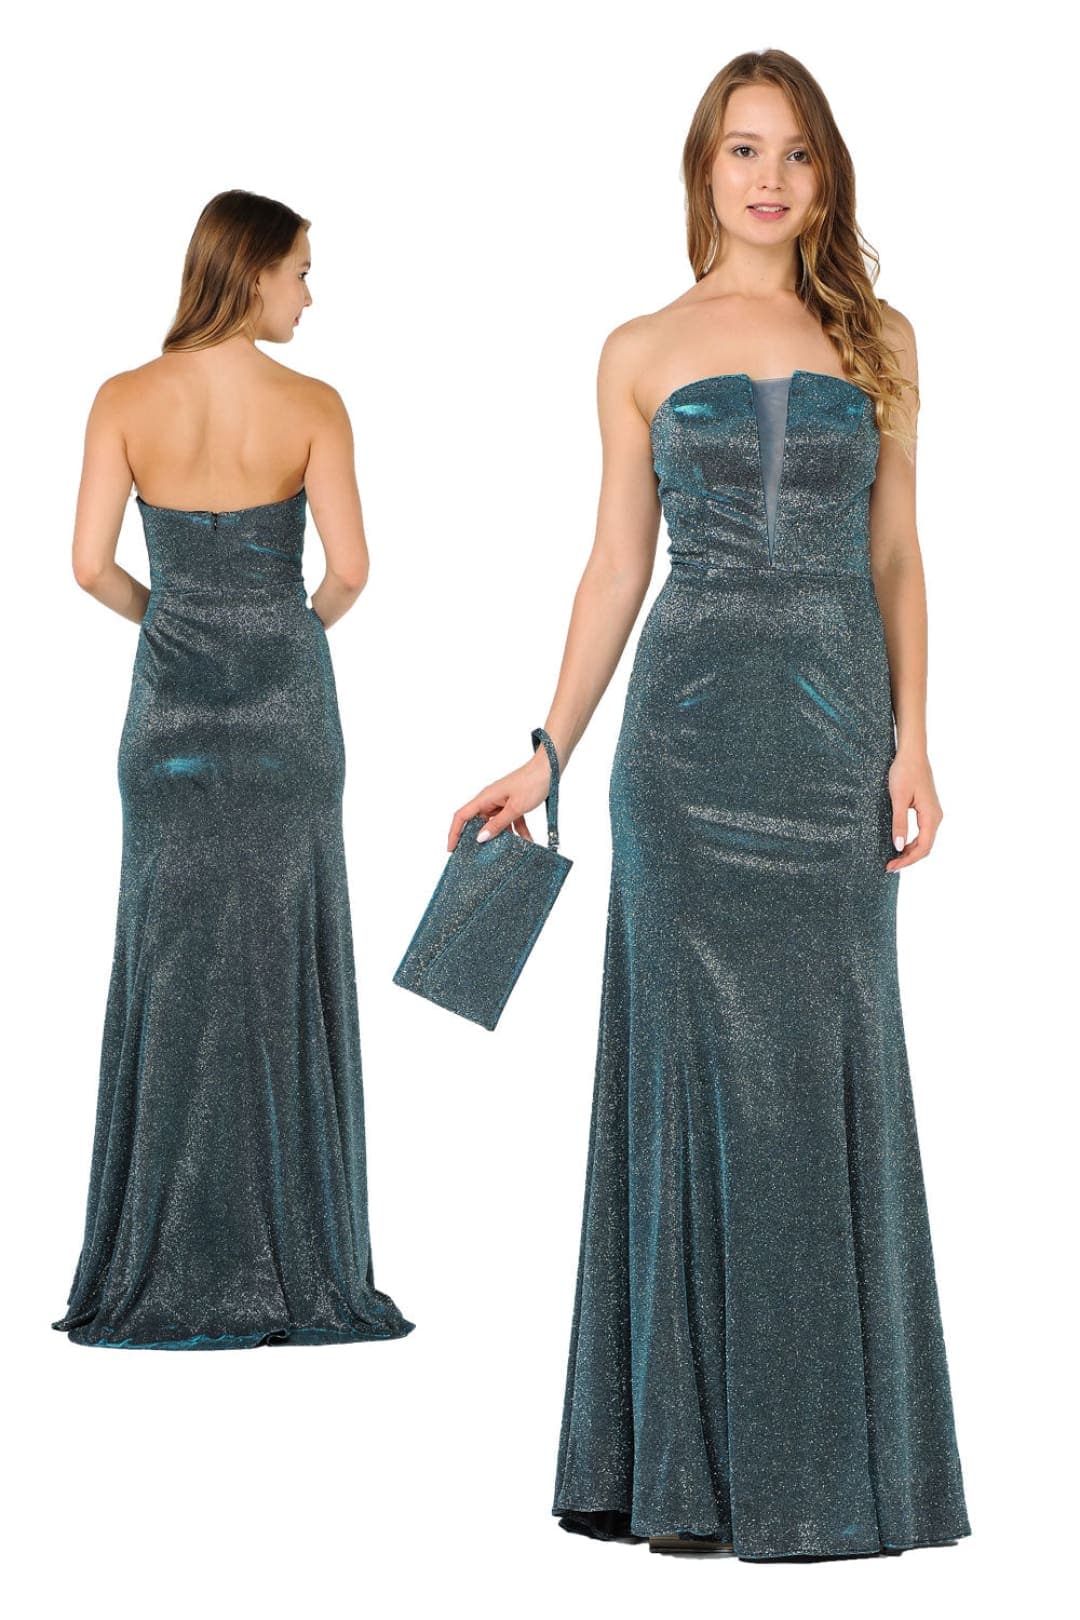 Wedding Dresses For Guests - TEAL / XS